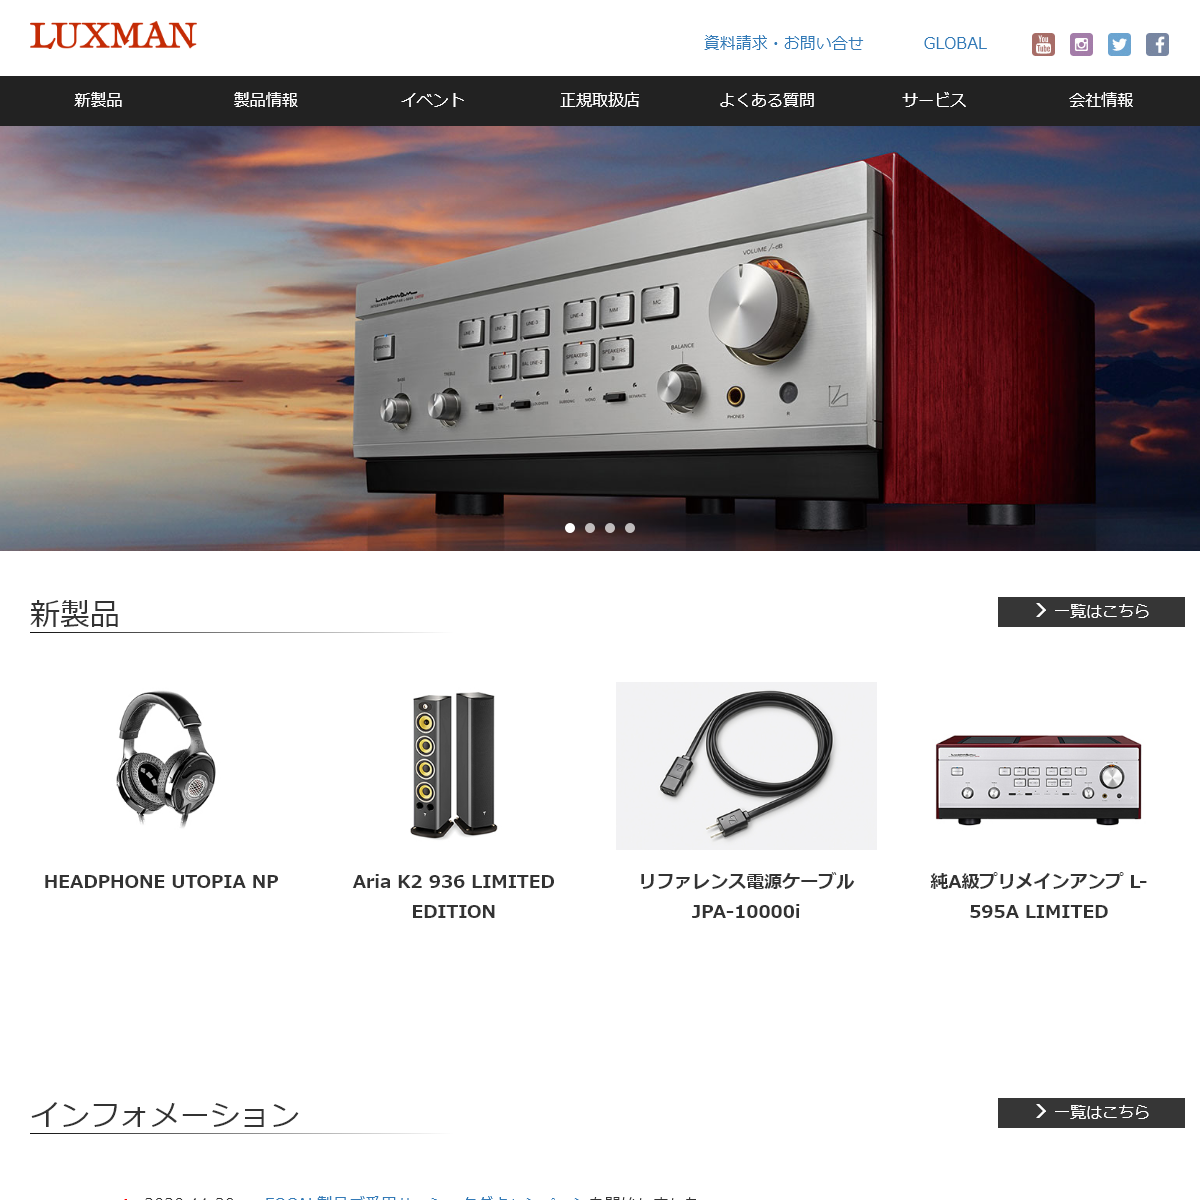 A complete backup of luxman.co.jp